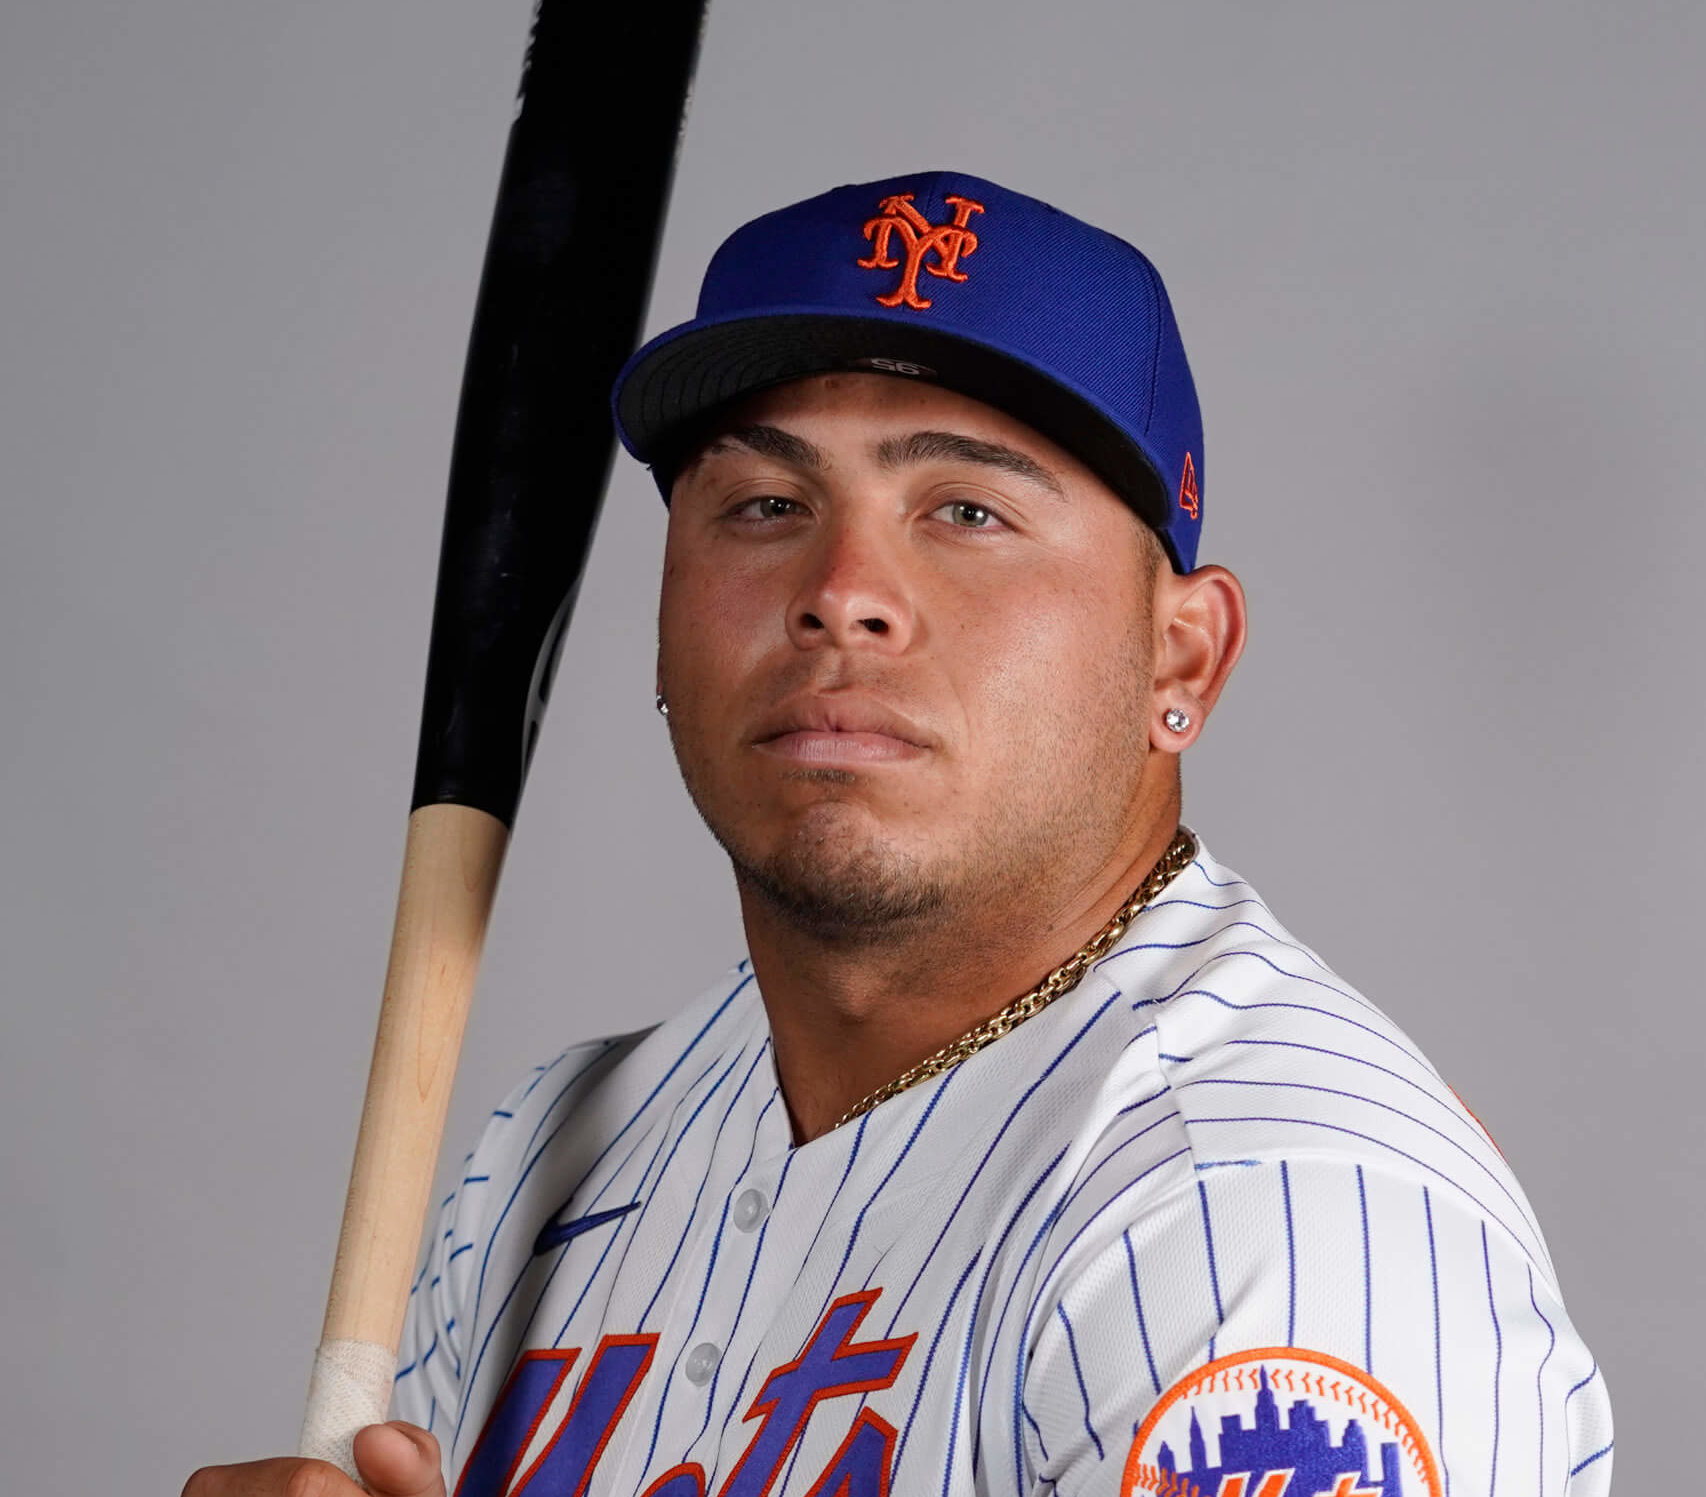 Mets' Francisco Alvarez could begin catching Friday to continue